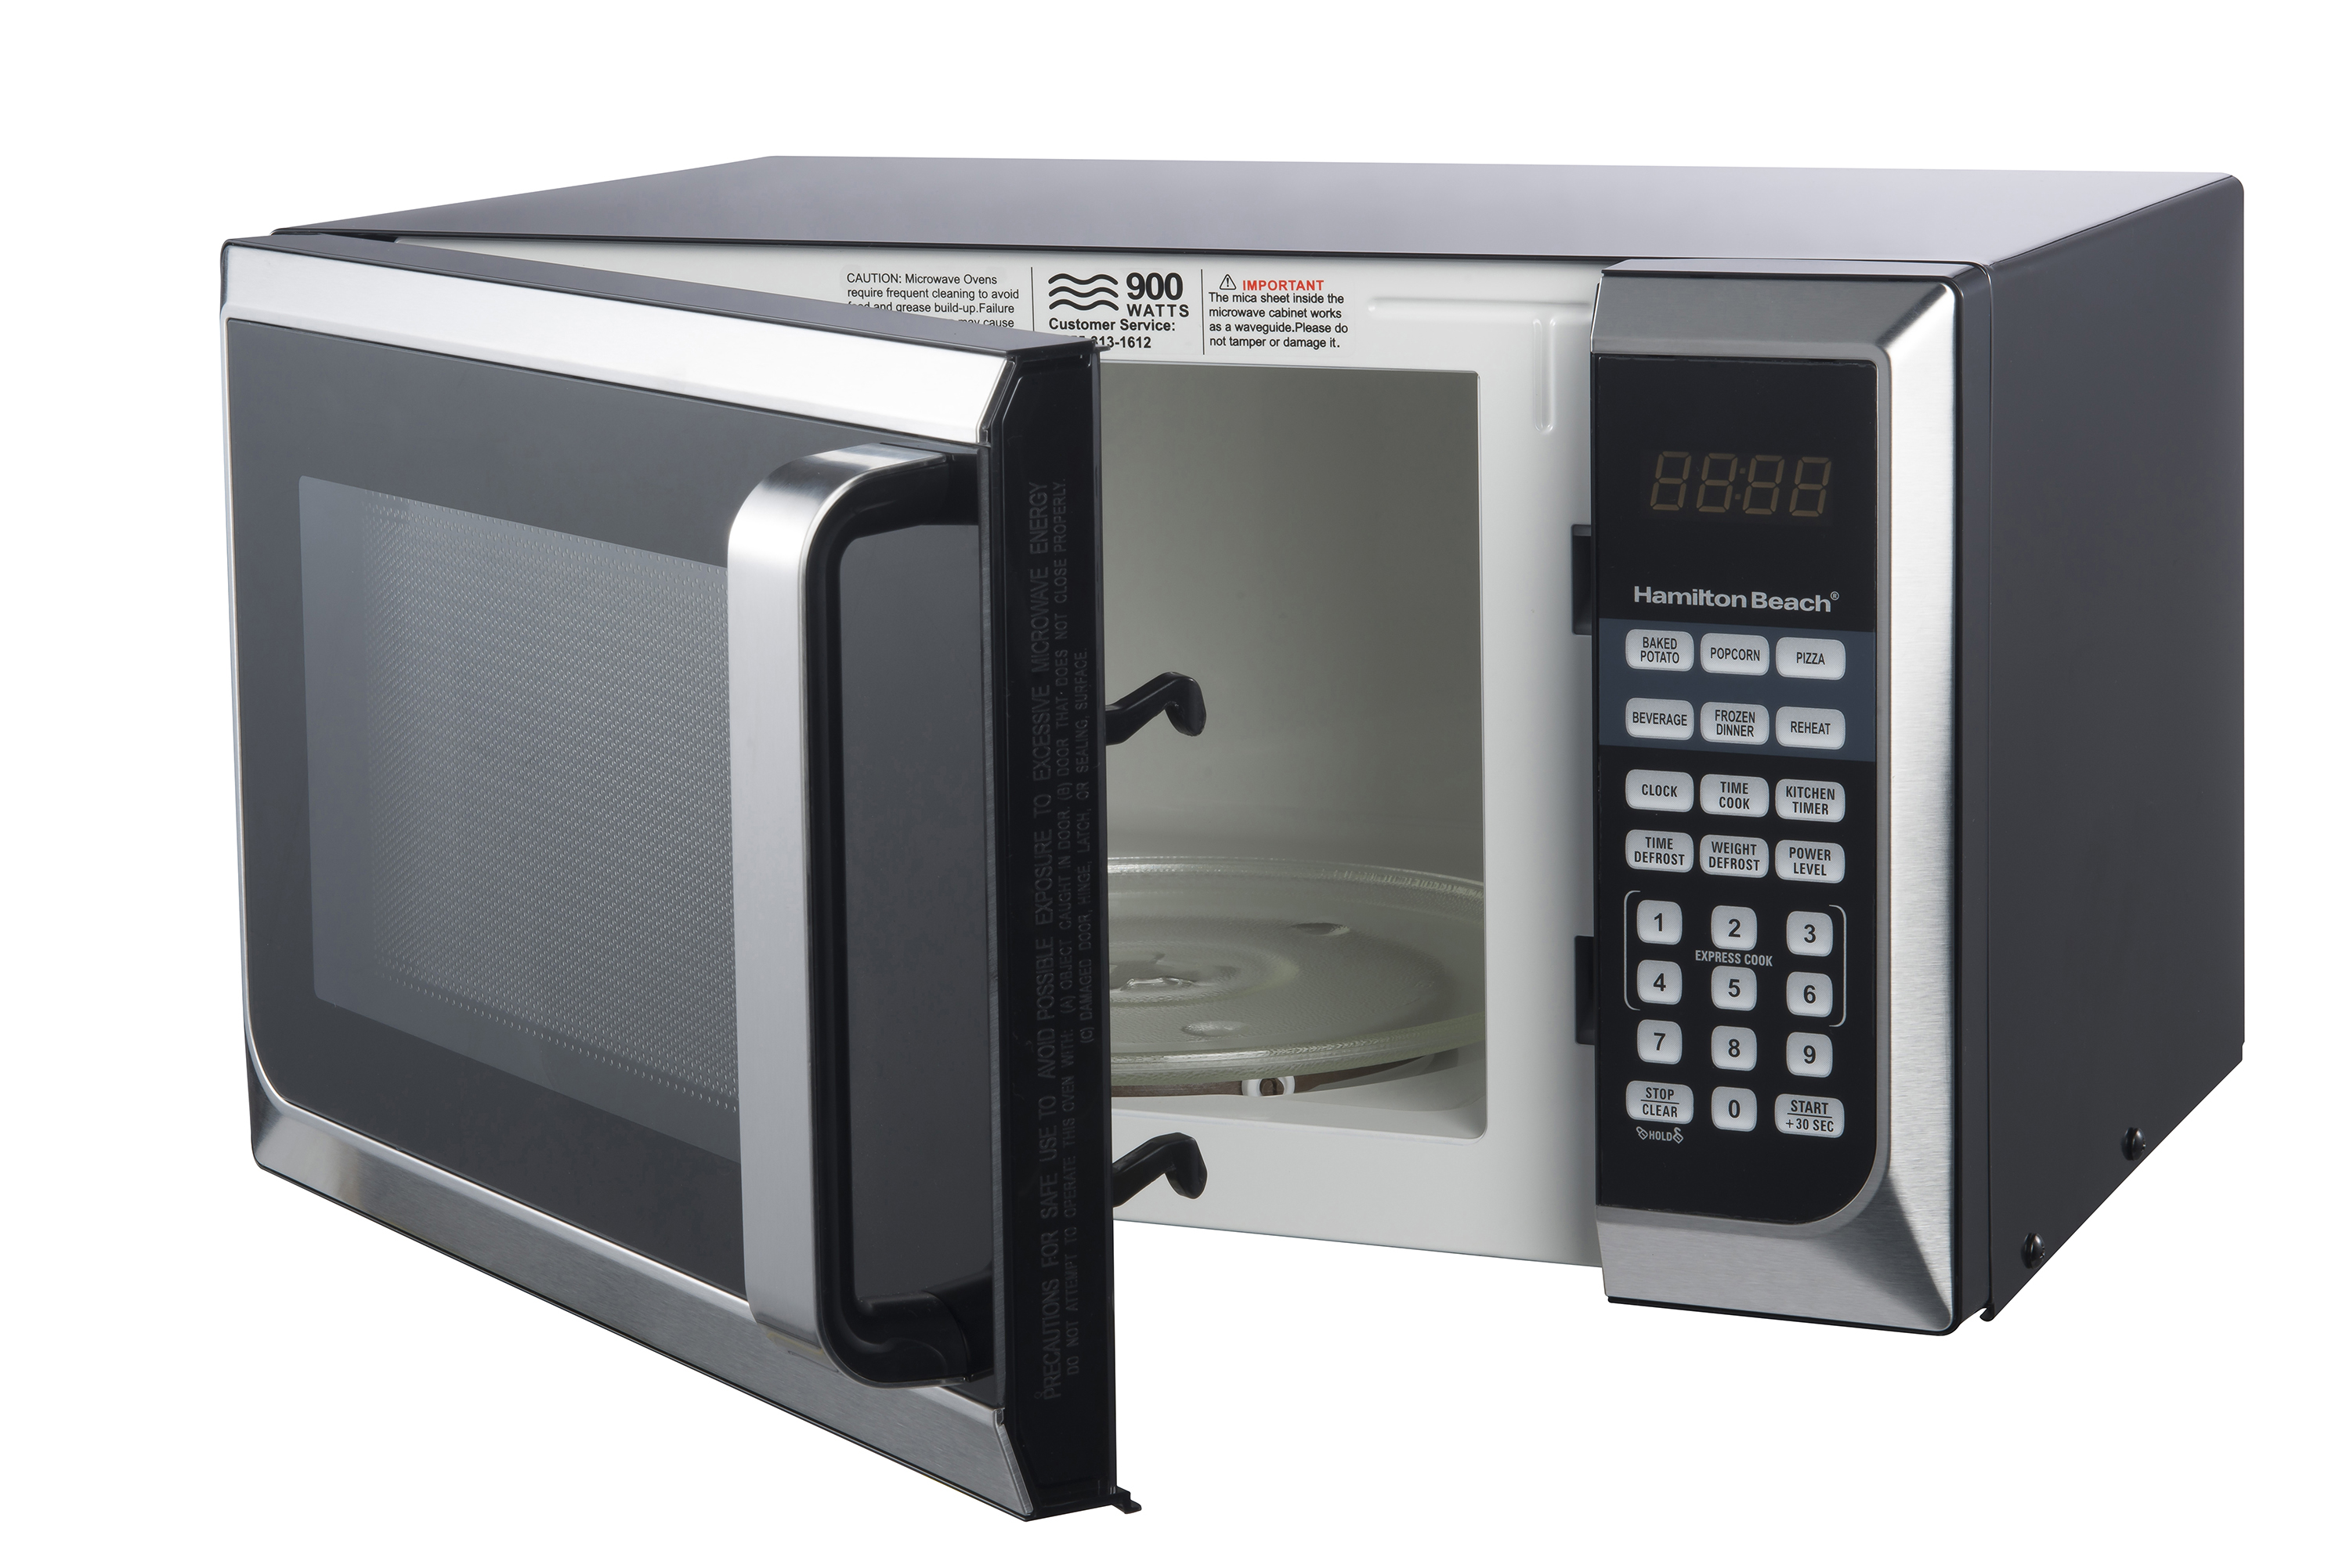 Hamilton Beach 0.9 Cu ft Countertop Microwave Oven in Stainless Steel, New - image 4 of 7